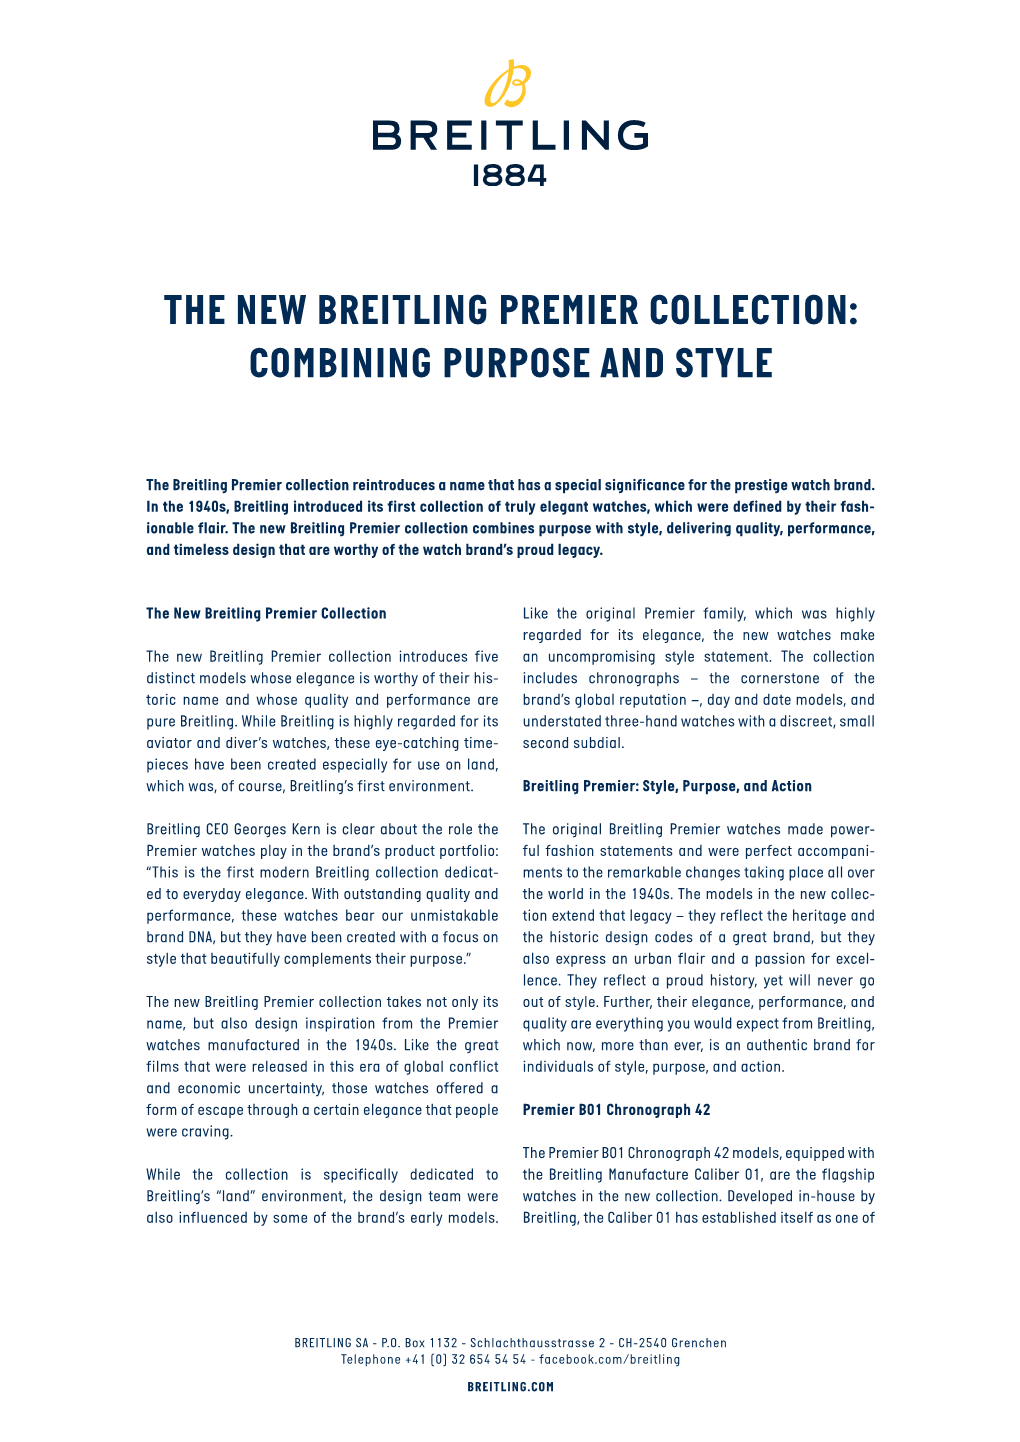 The New Breitling Premier Collection: Combining Purpose and Style